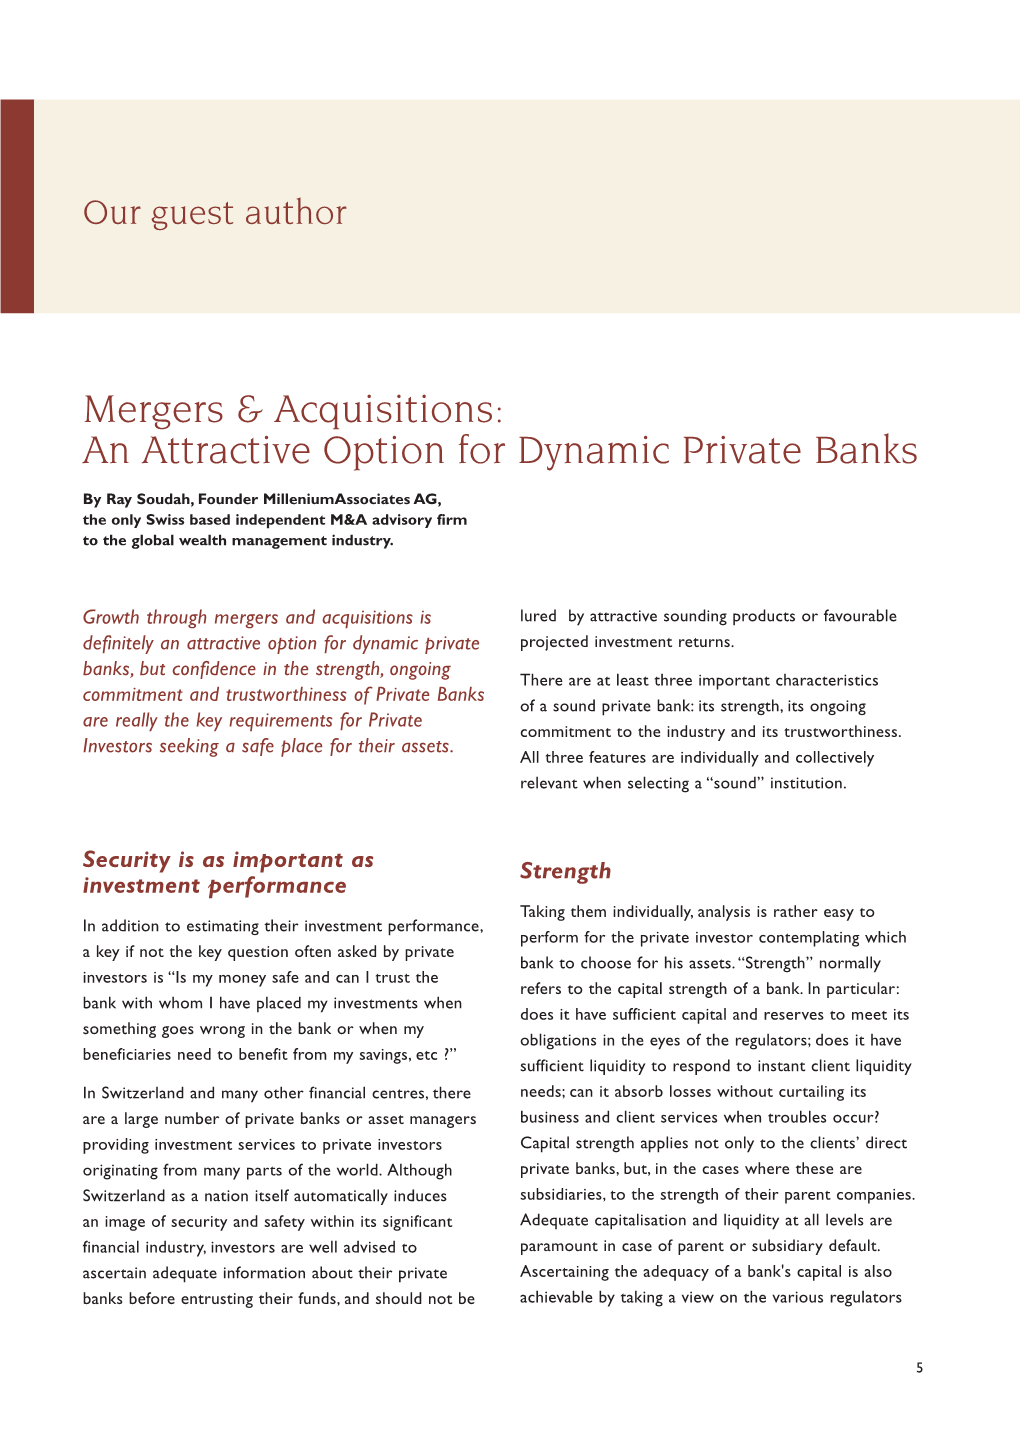 Mergers & Acquisitions: an Attractive Option for Dynamic Private Banks